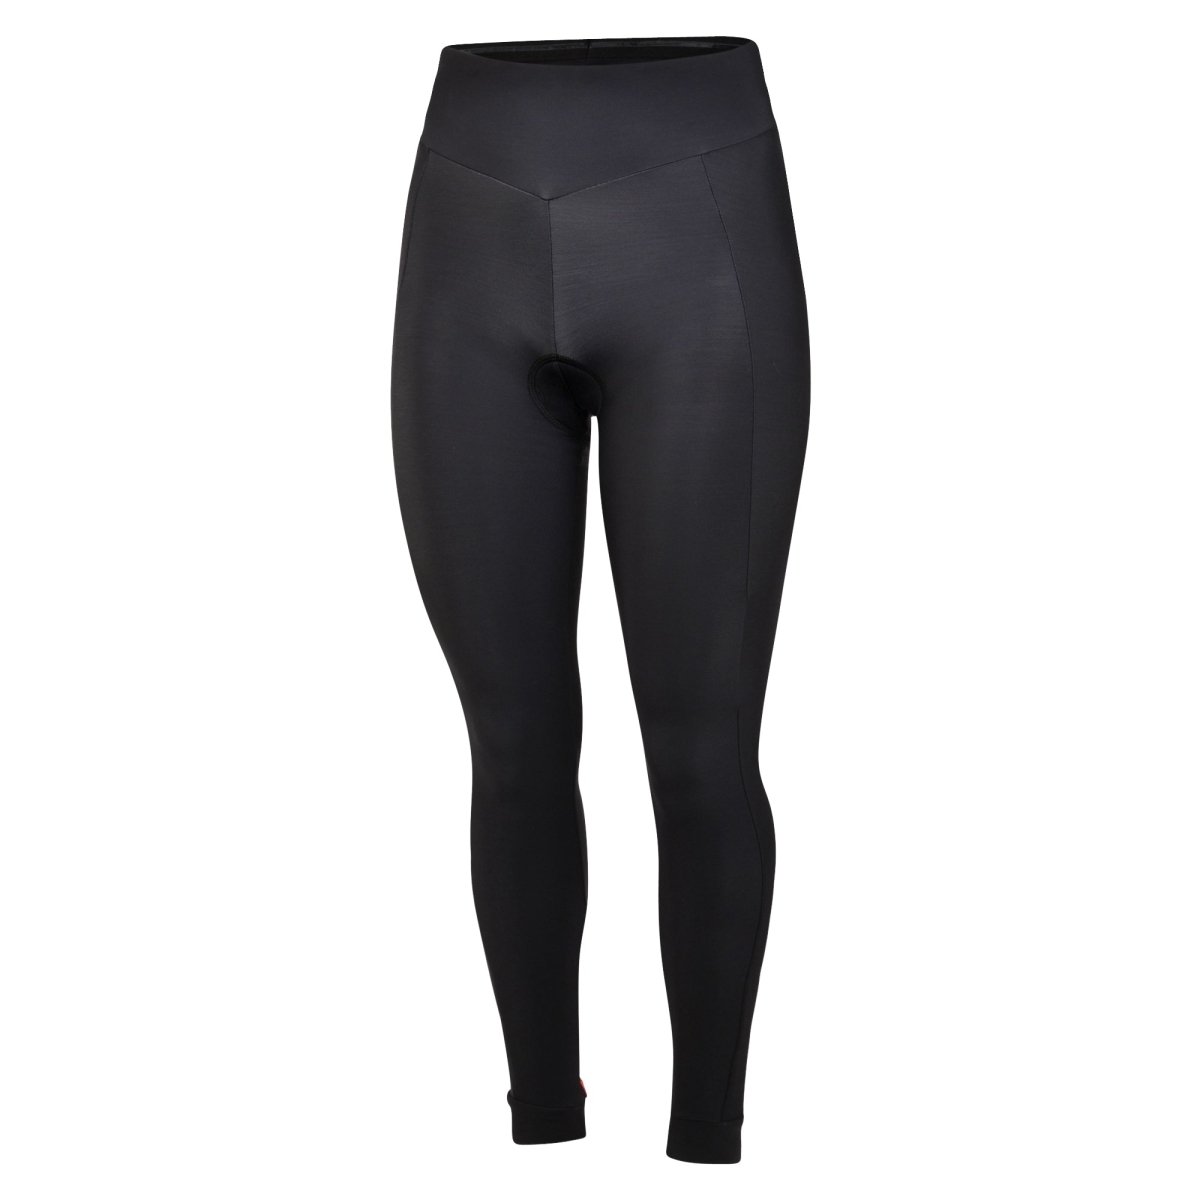 Sikma Women Cycling Tights Winter Thermal Padded Trousers ladies